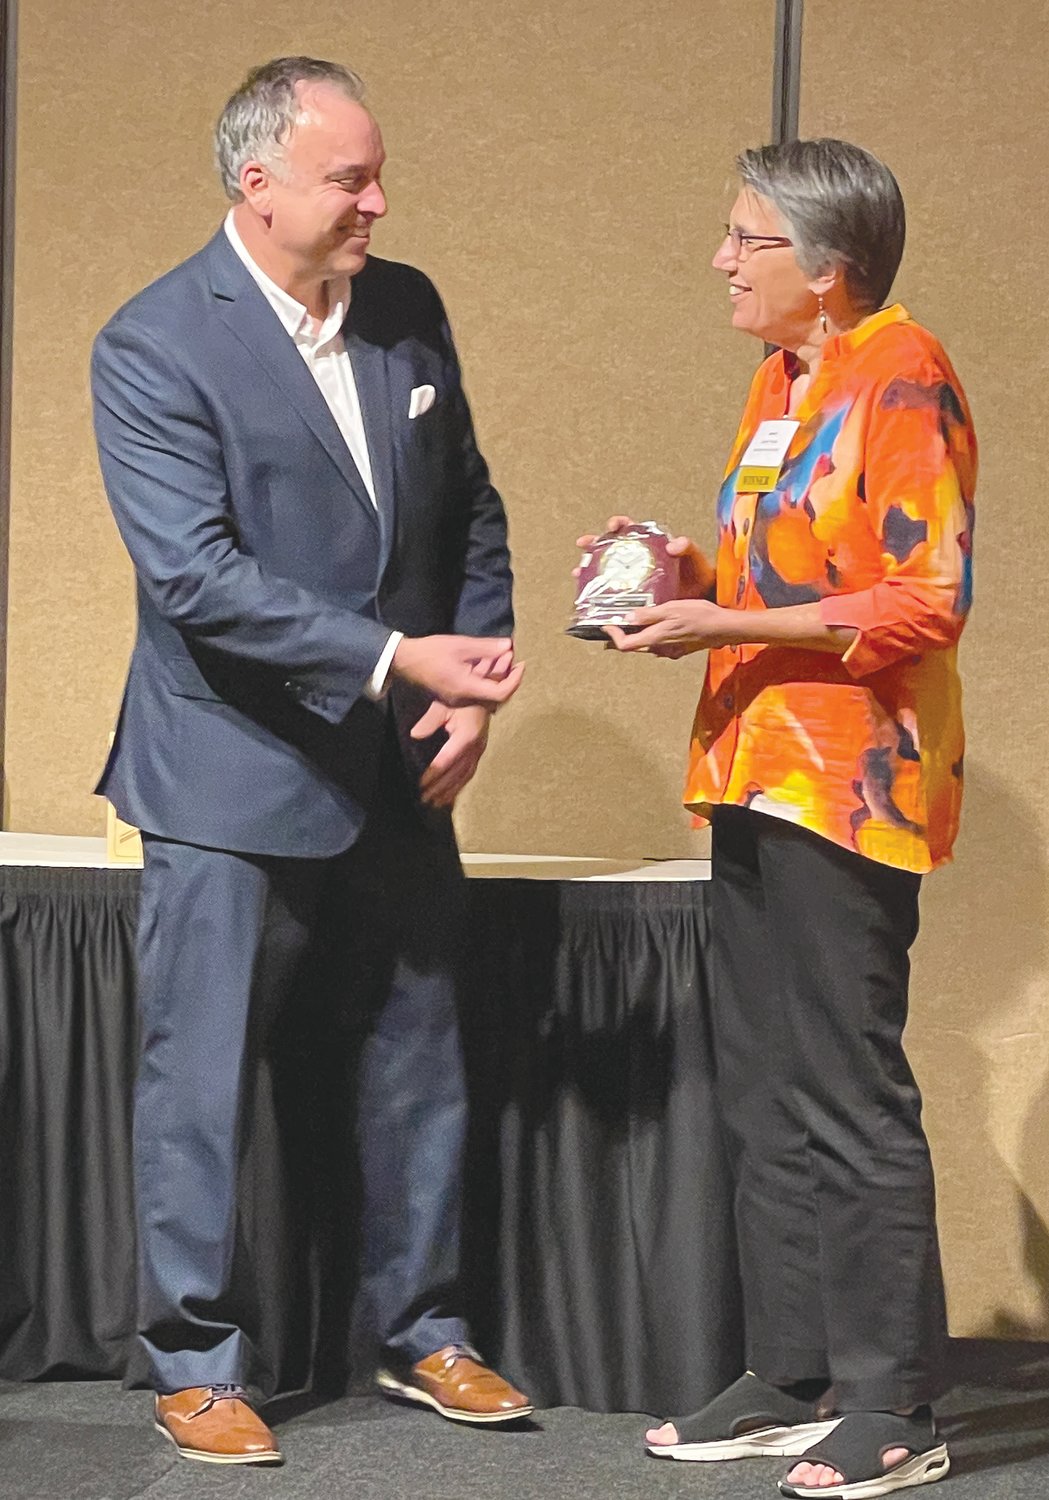 Karen Thada received the Area 4 Outstanding Volunteer Clock Award for her many hours of volunteering in the community at the Indiana Retired Teachers Association Meeting on June 8.